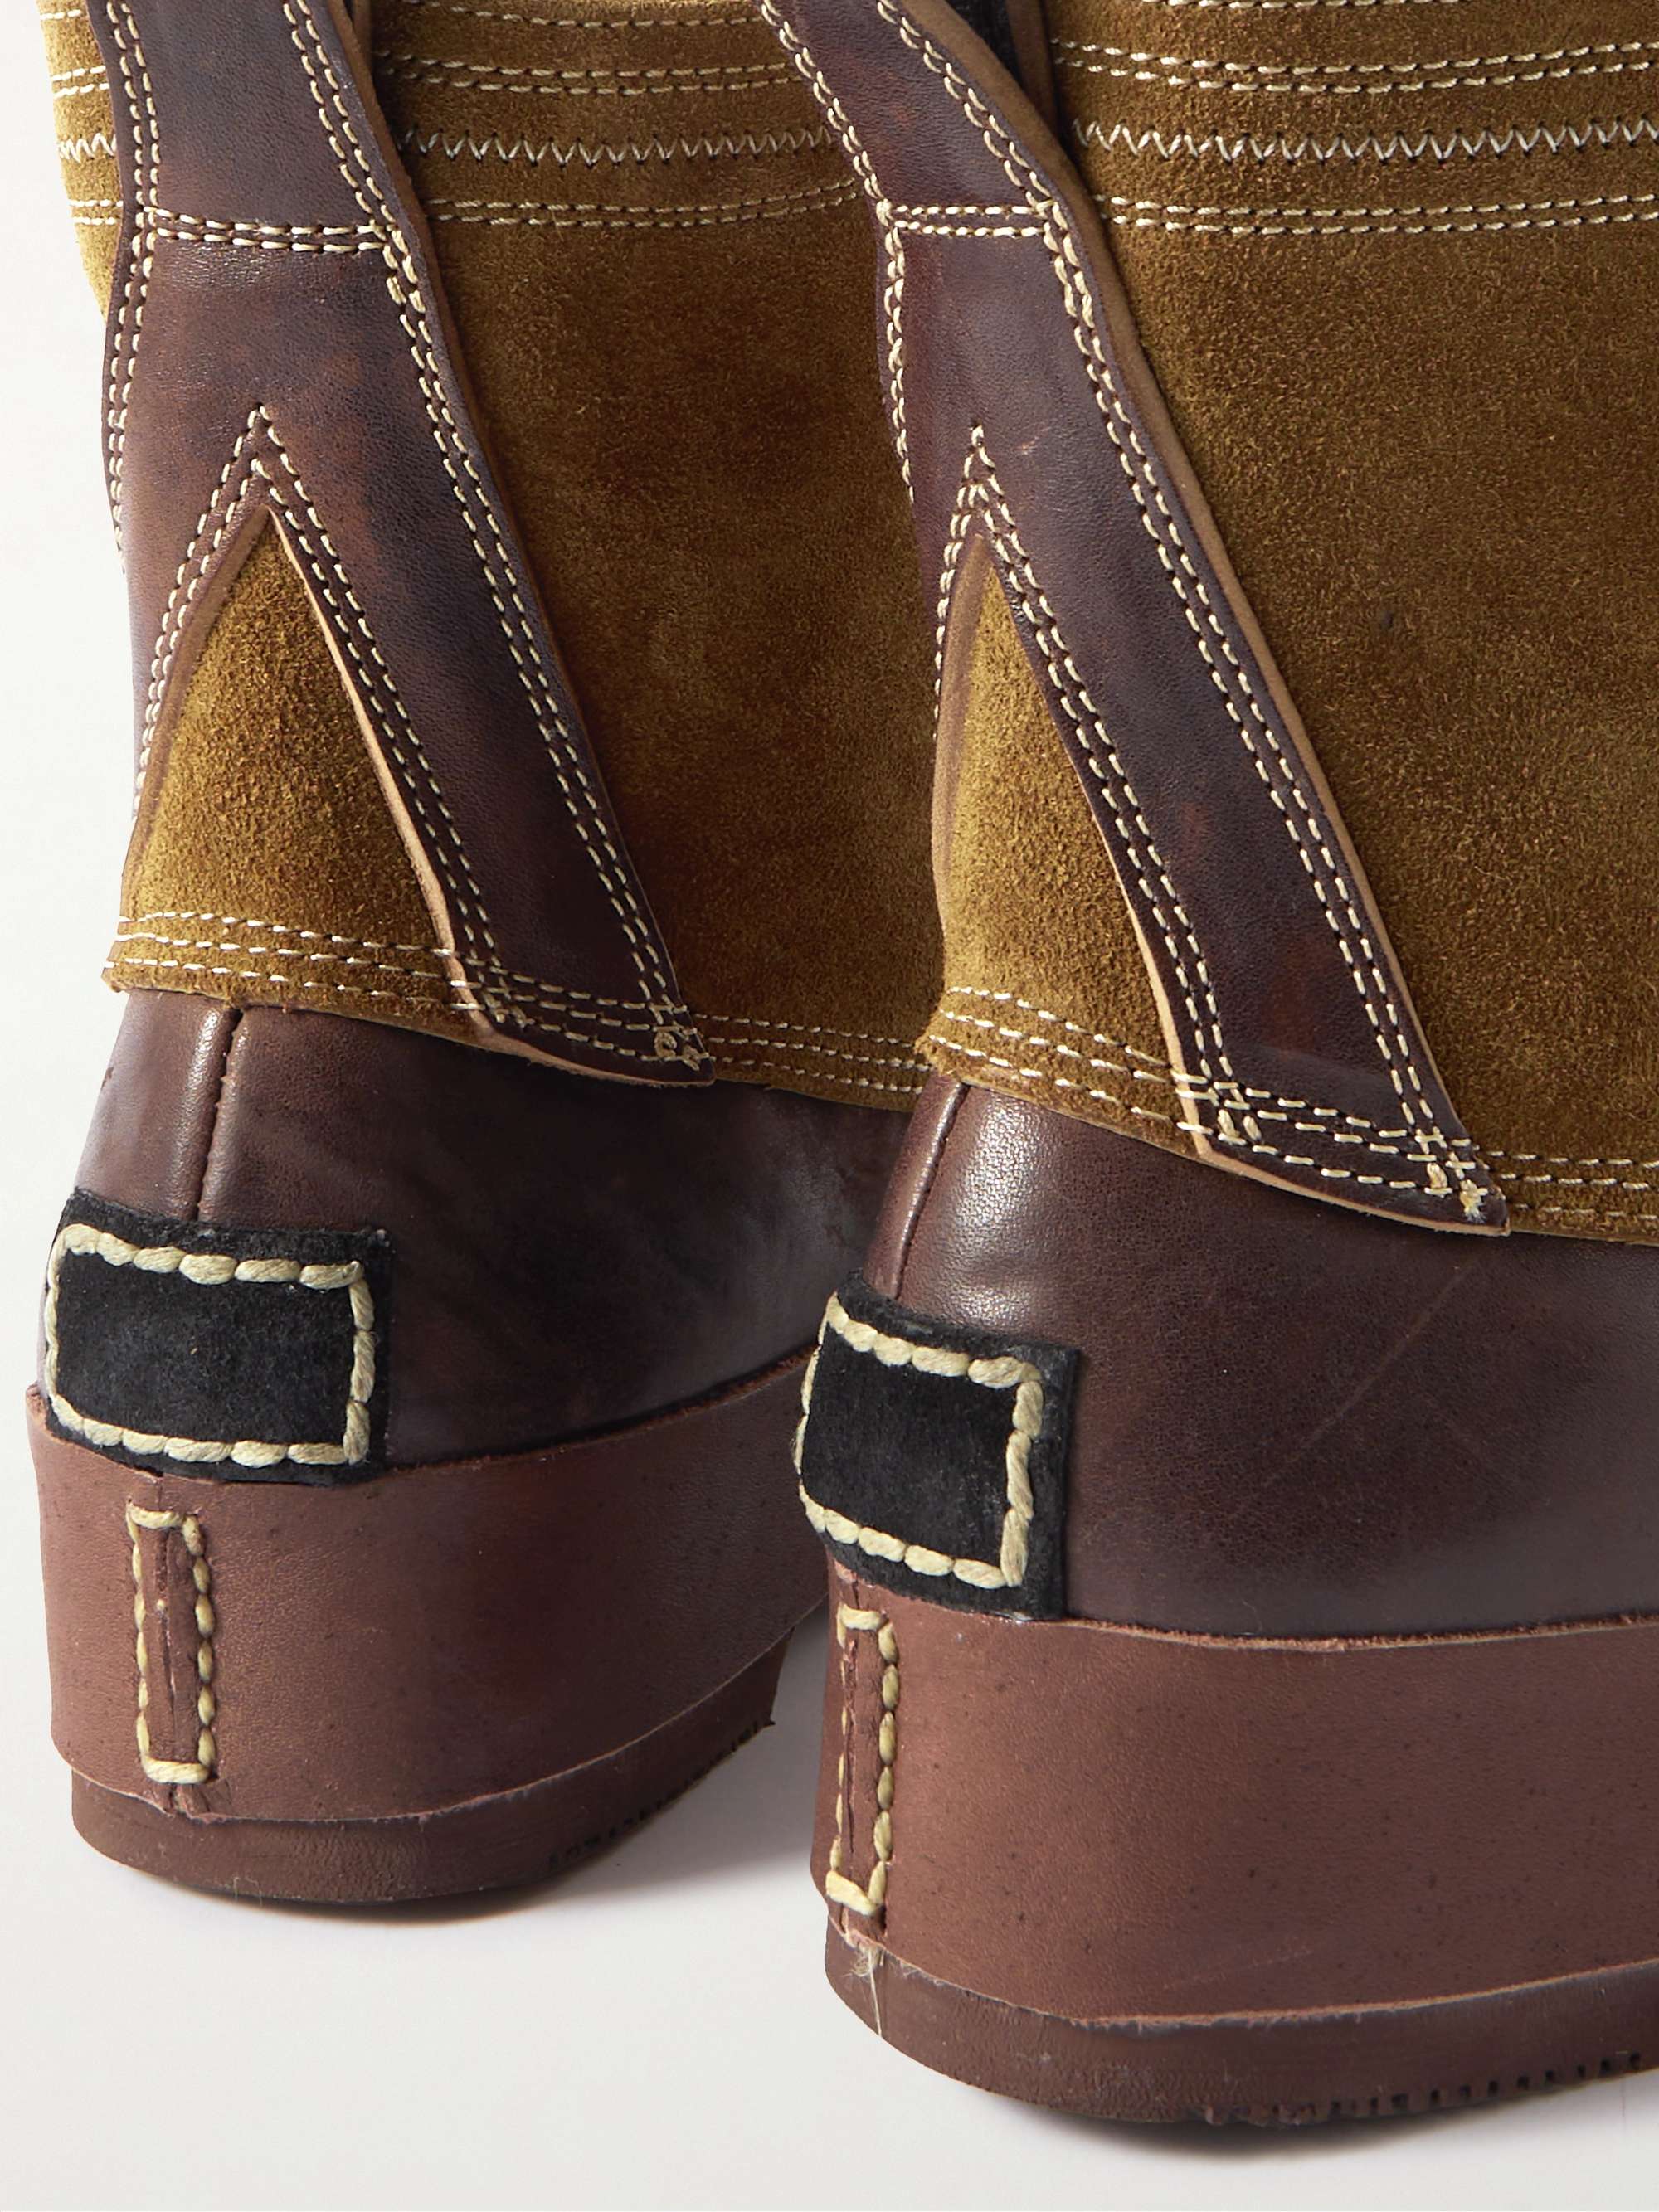 VISVIM Decoy Duck Leather and Suede Boots